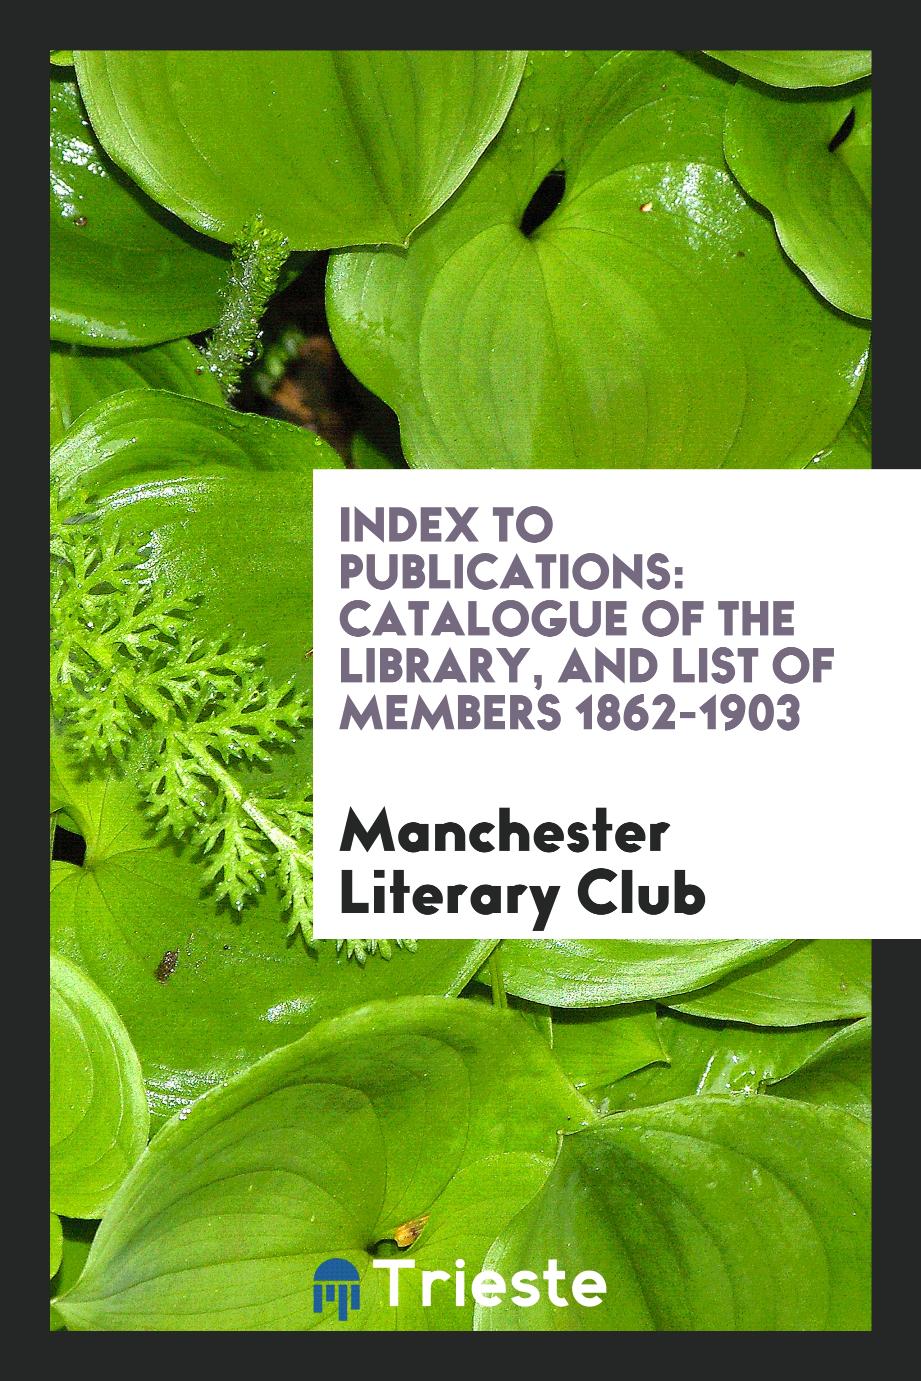 Index to Publications: Catalogue of the Library, and List of Members 1862-1903